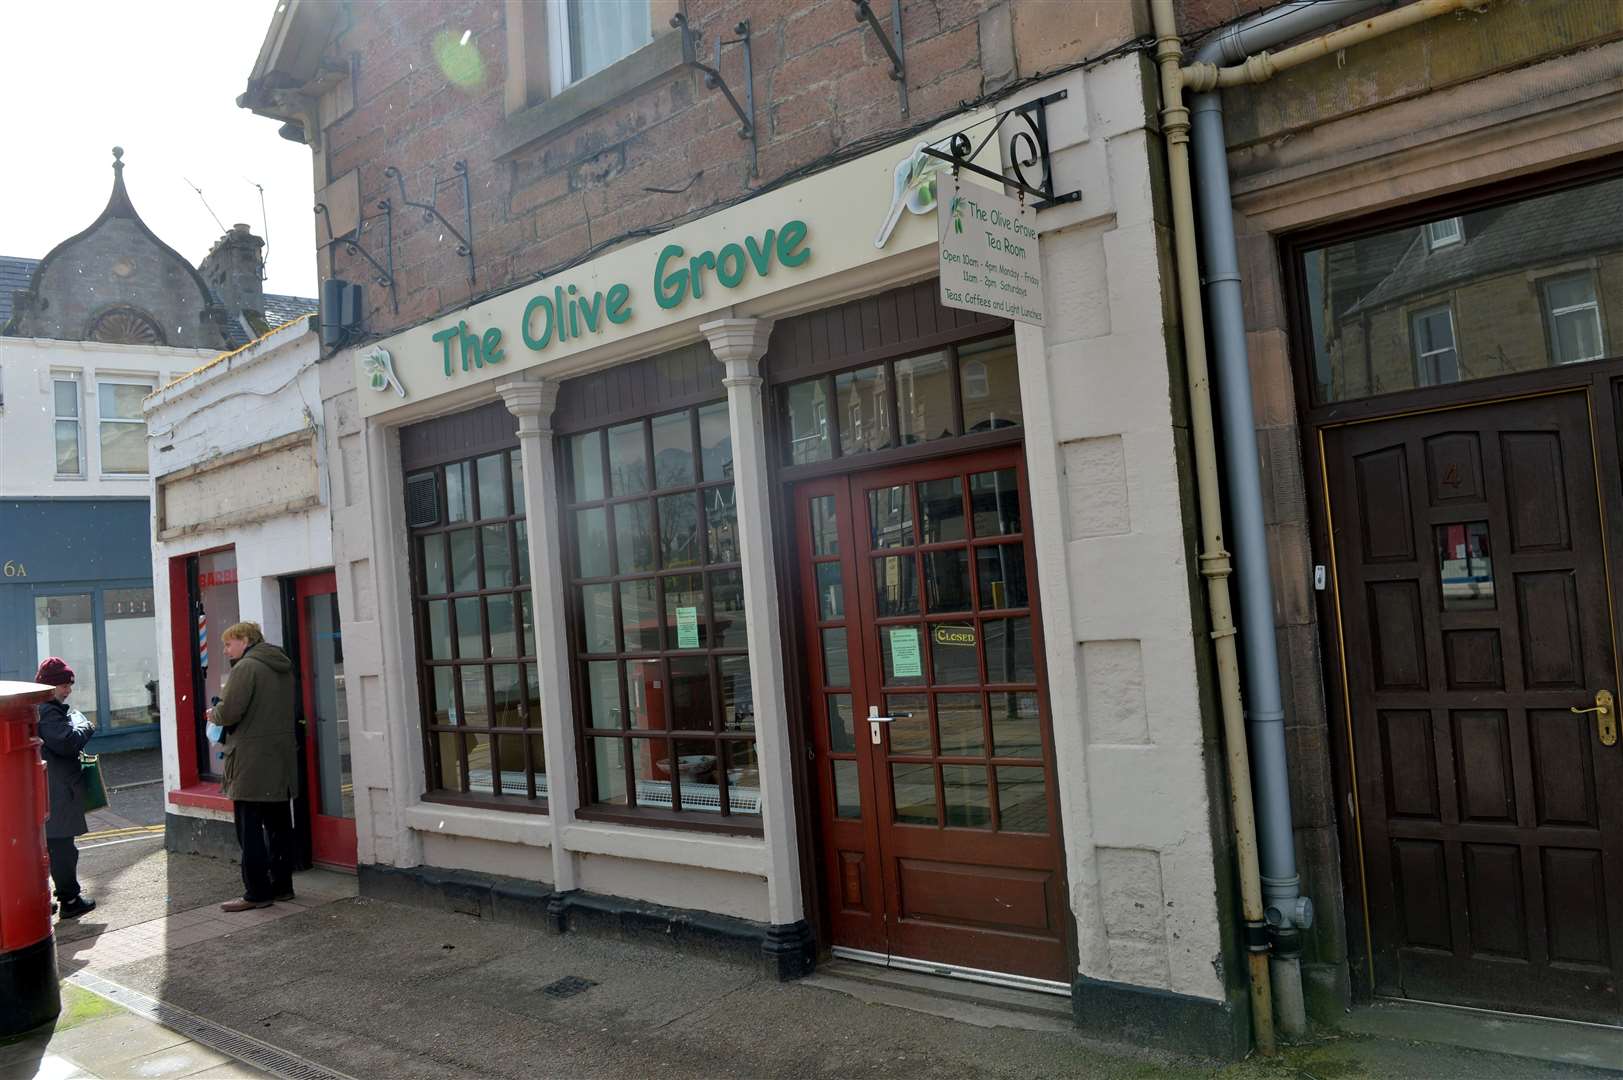 The Olive Grove cafe in Crown has closed its doors.